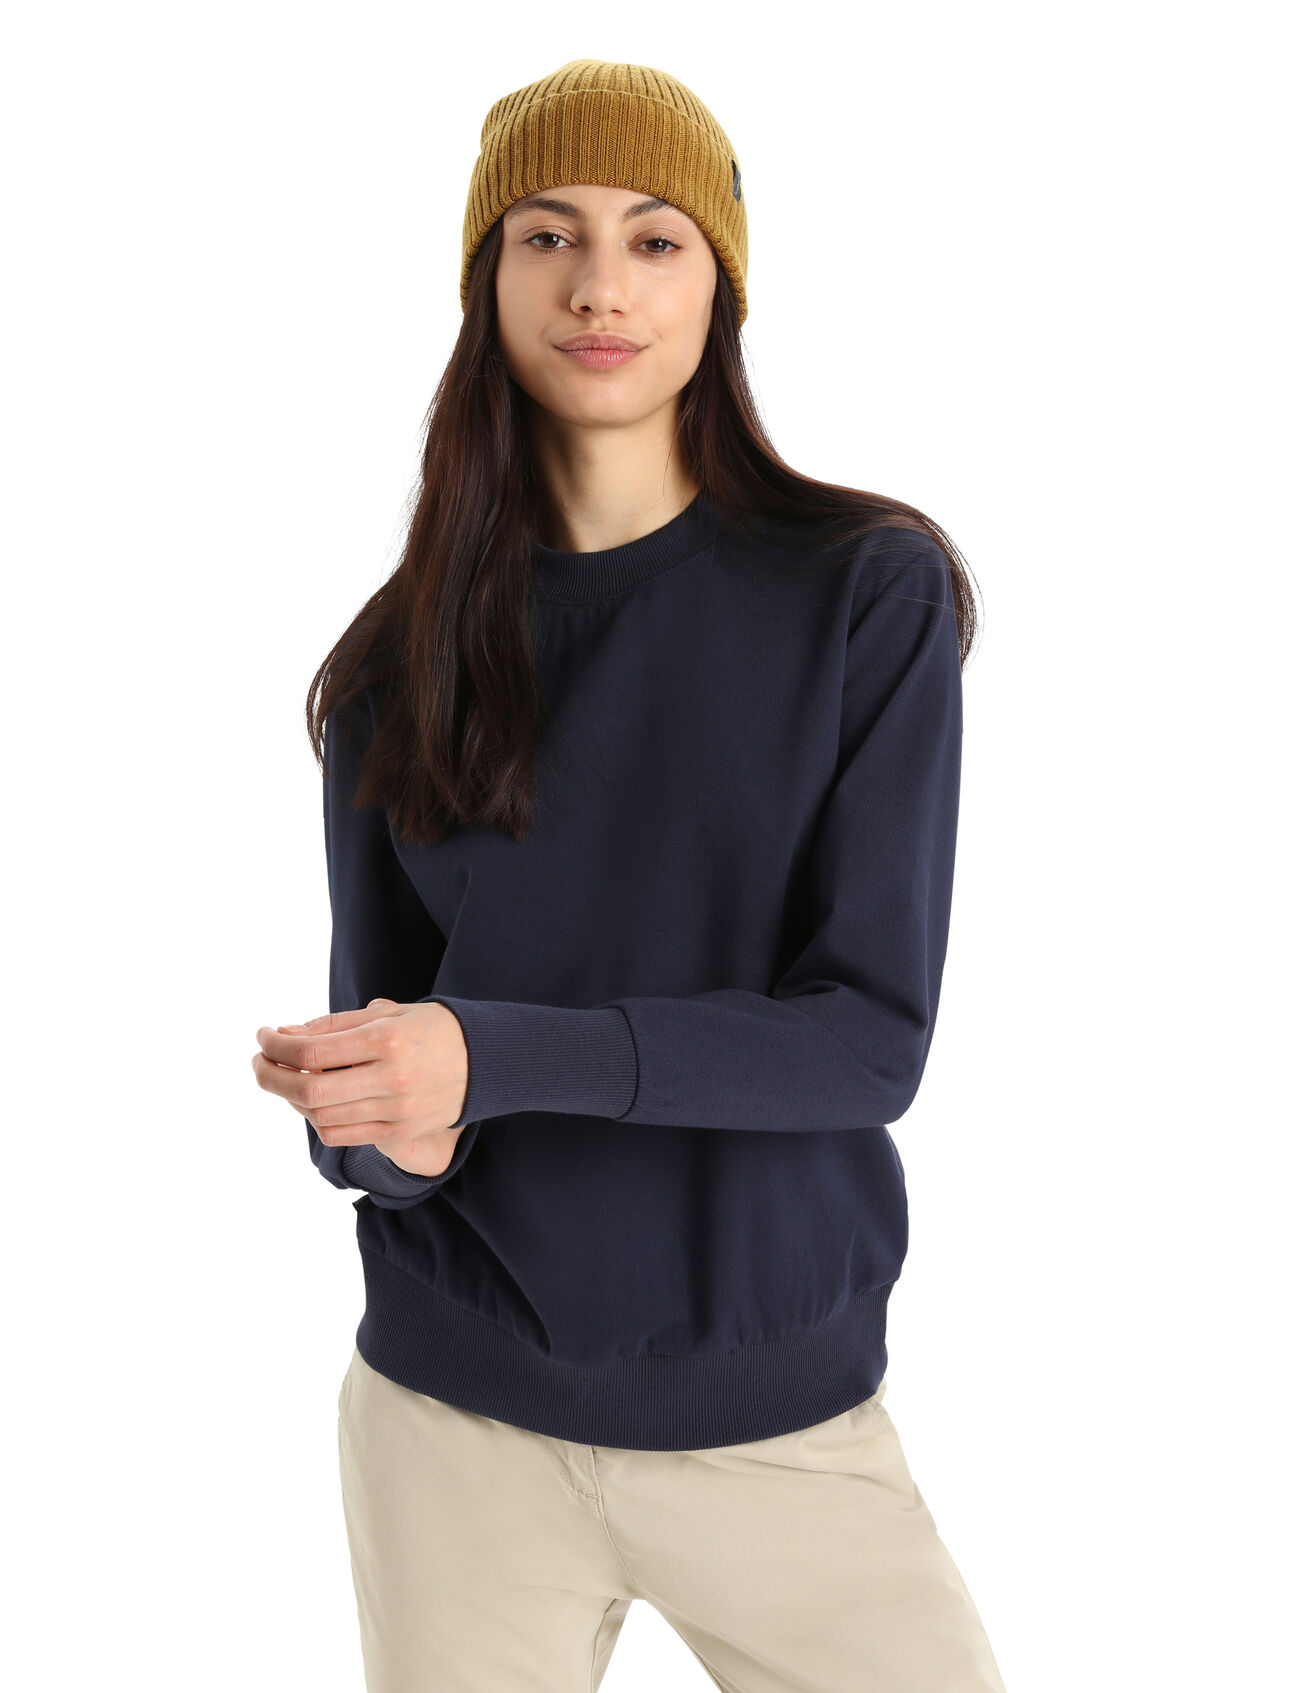 Womens Merino Central II Long Sleeve Sweatshirt A versatile, everyday pullover that goes anywhere in comfort, the Central II Long Sleeve Sweatshirt features a sustainable blend of natural merino wool and soft organic cotton.